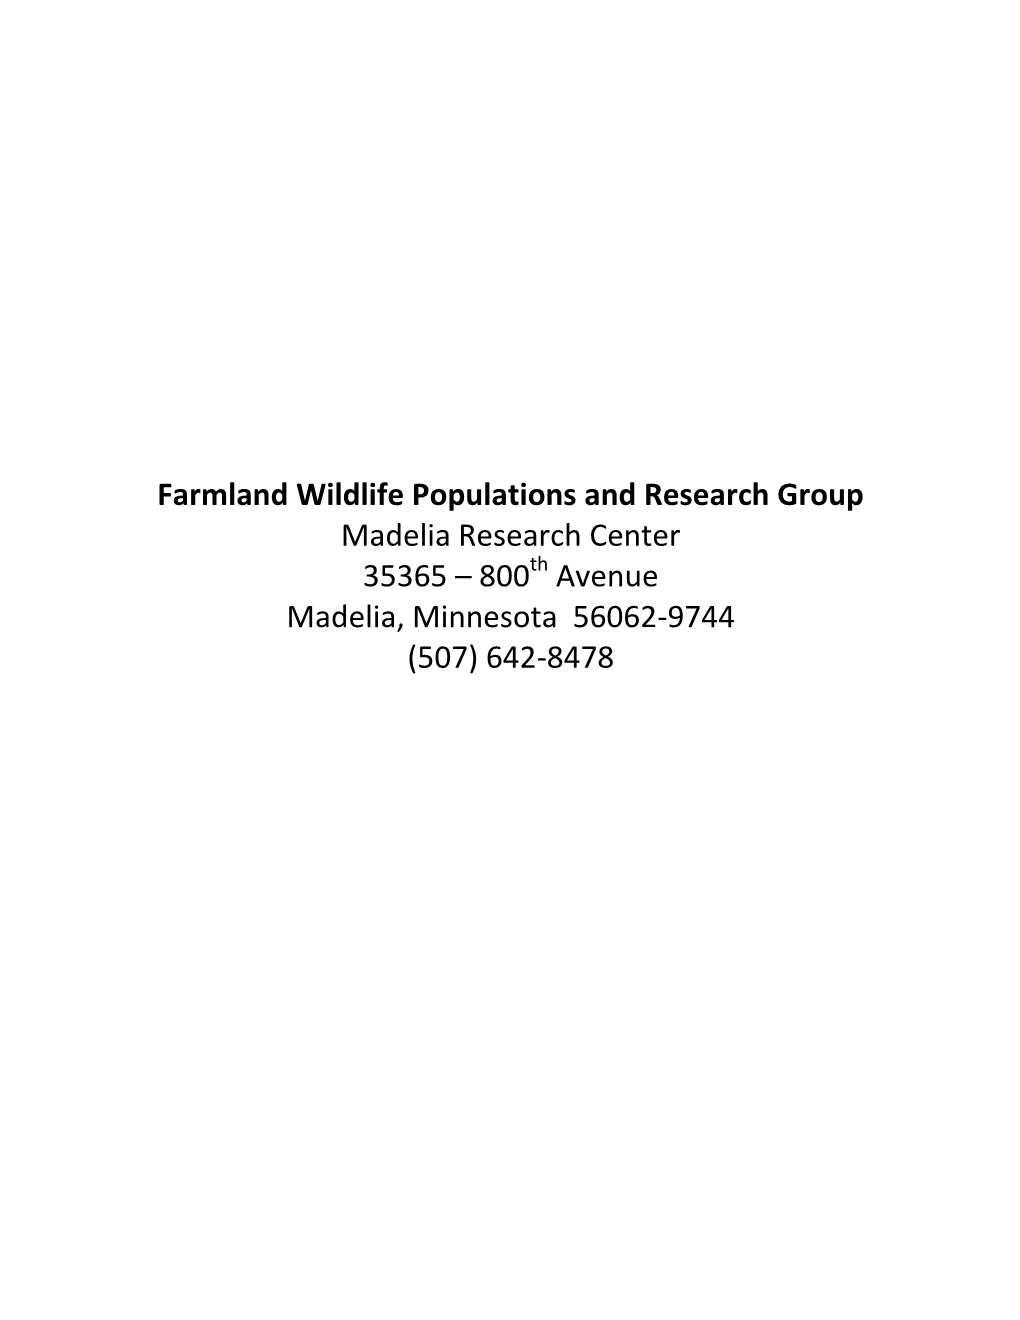 Farmland Wildlife Populations and Research Group Madelia Research Center 35365 – 800Th Avenue Madelia, Minnesota 56062-9744 (507) 642-8478 Page 161